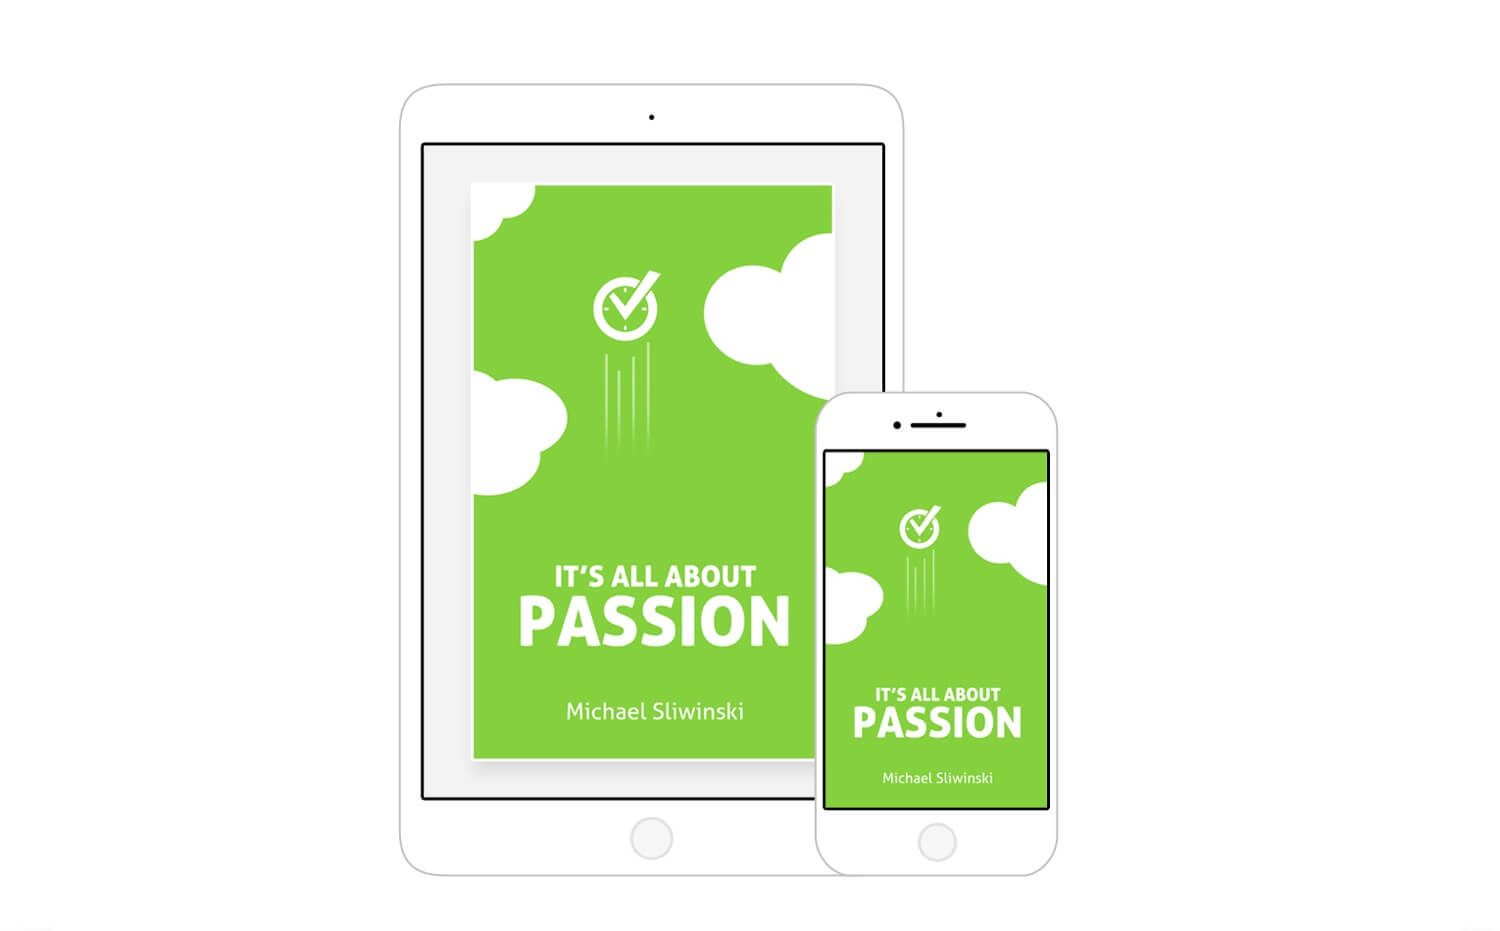 What did you think about my book “It’s all about passion!”?